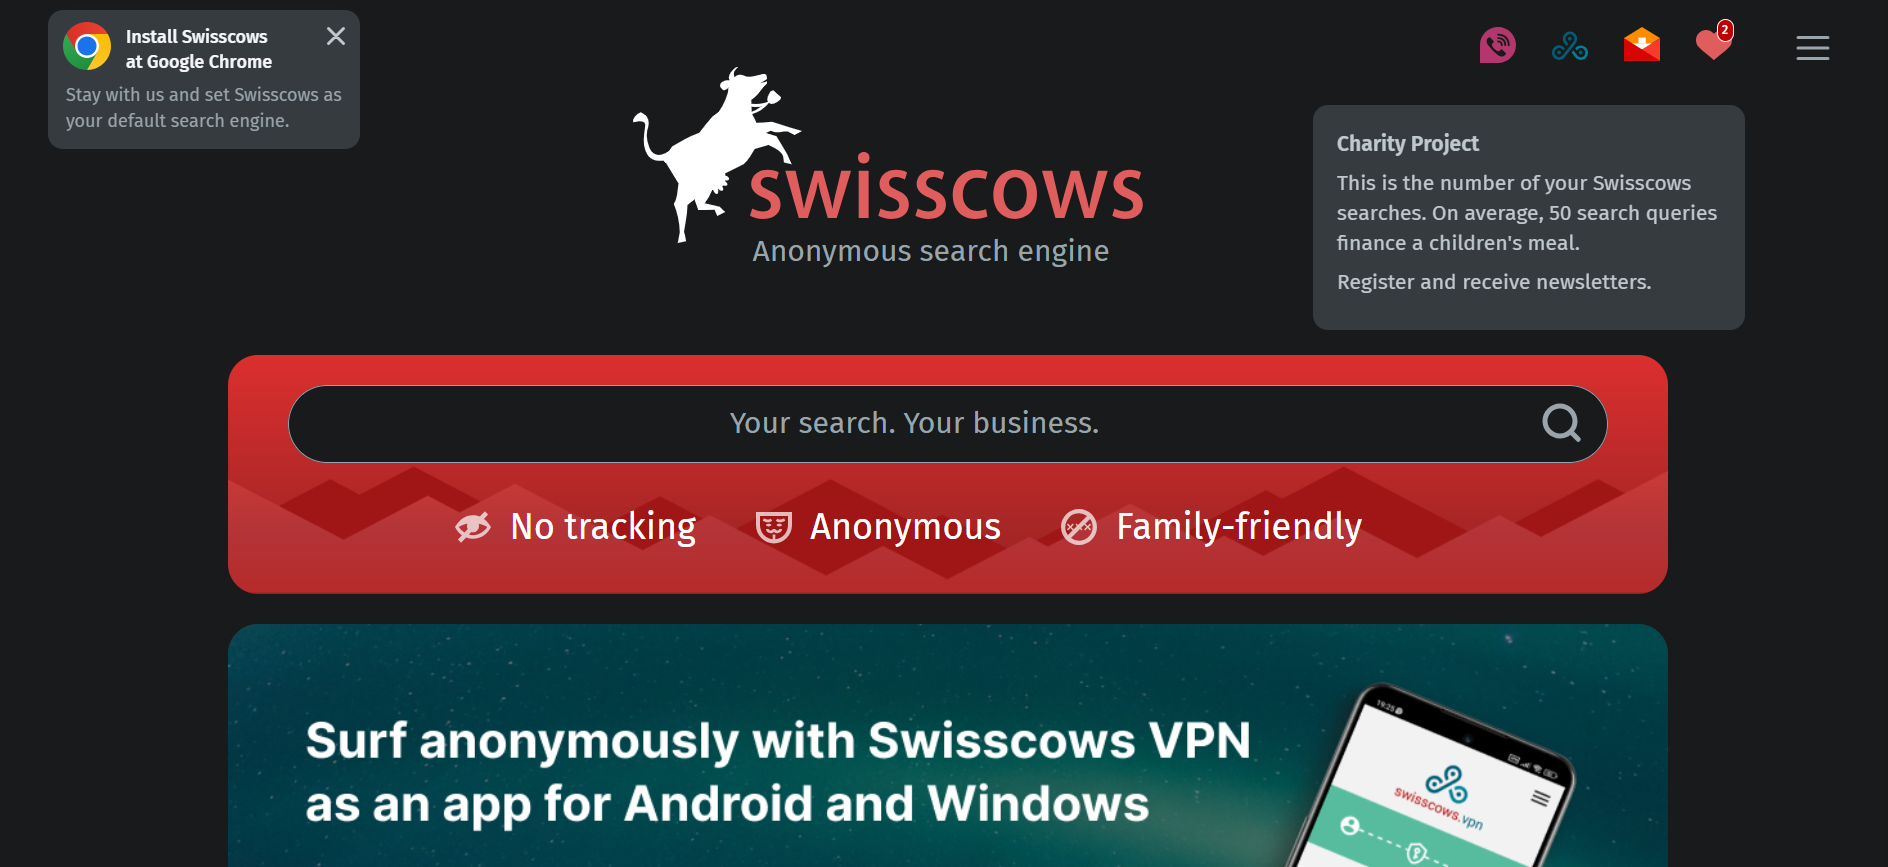 The Swisscows Search Engine Homepage